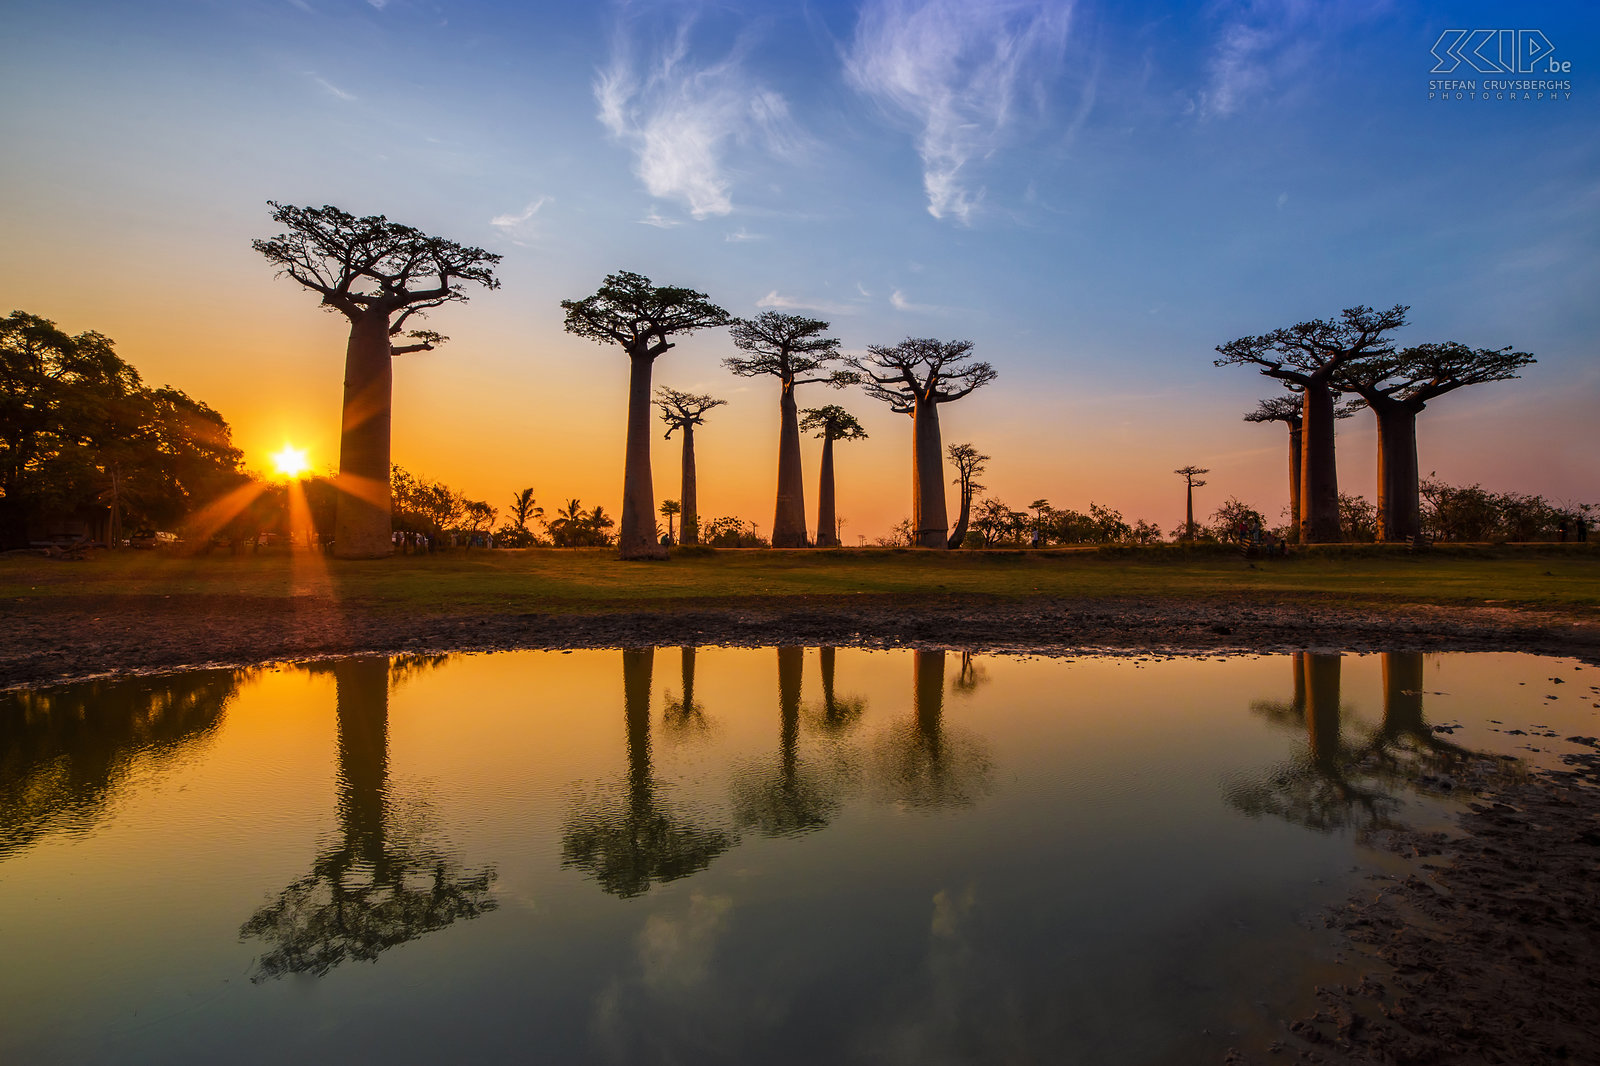 Sunset at the Avenue of Baobabs The ‘Avenue of Baobabs’/’Alley of Baobabs’/’Allée des Baobabs’ is one of Madagascar’s iconic landmarks. The region between Morondava and Belon'i Tsiribihina in western Madagscar has hundreds of impressive baobabs. This ‘avenue’ is a prominent group of 25 baobab trees along a dirt road. Baobabs are native of Madagascar. Six of the eight known species are endemic and the baobabs on the ‘avenue’ are ‘Adansonia grandidieri’, the tallest baobab species. These trees are 30 meters high and are thought to be more than 800 years old.  Stefan Cruysberghs